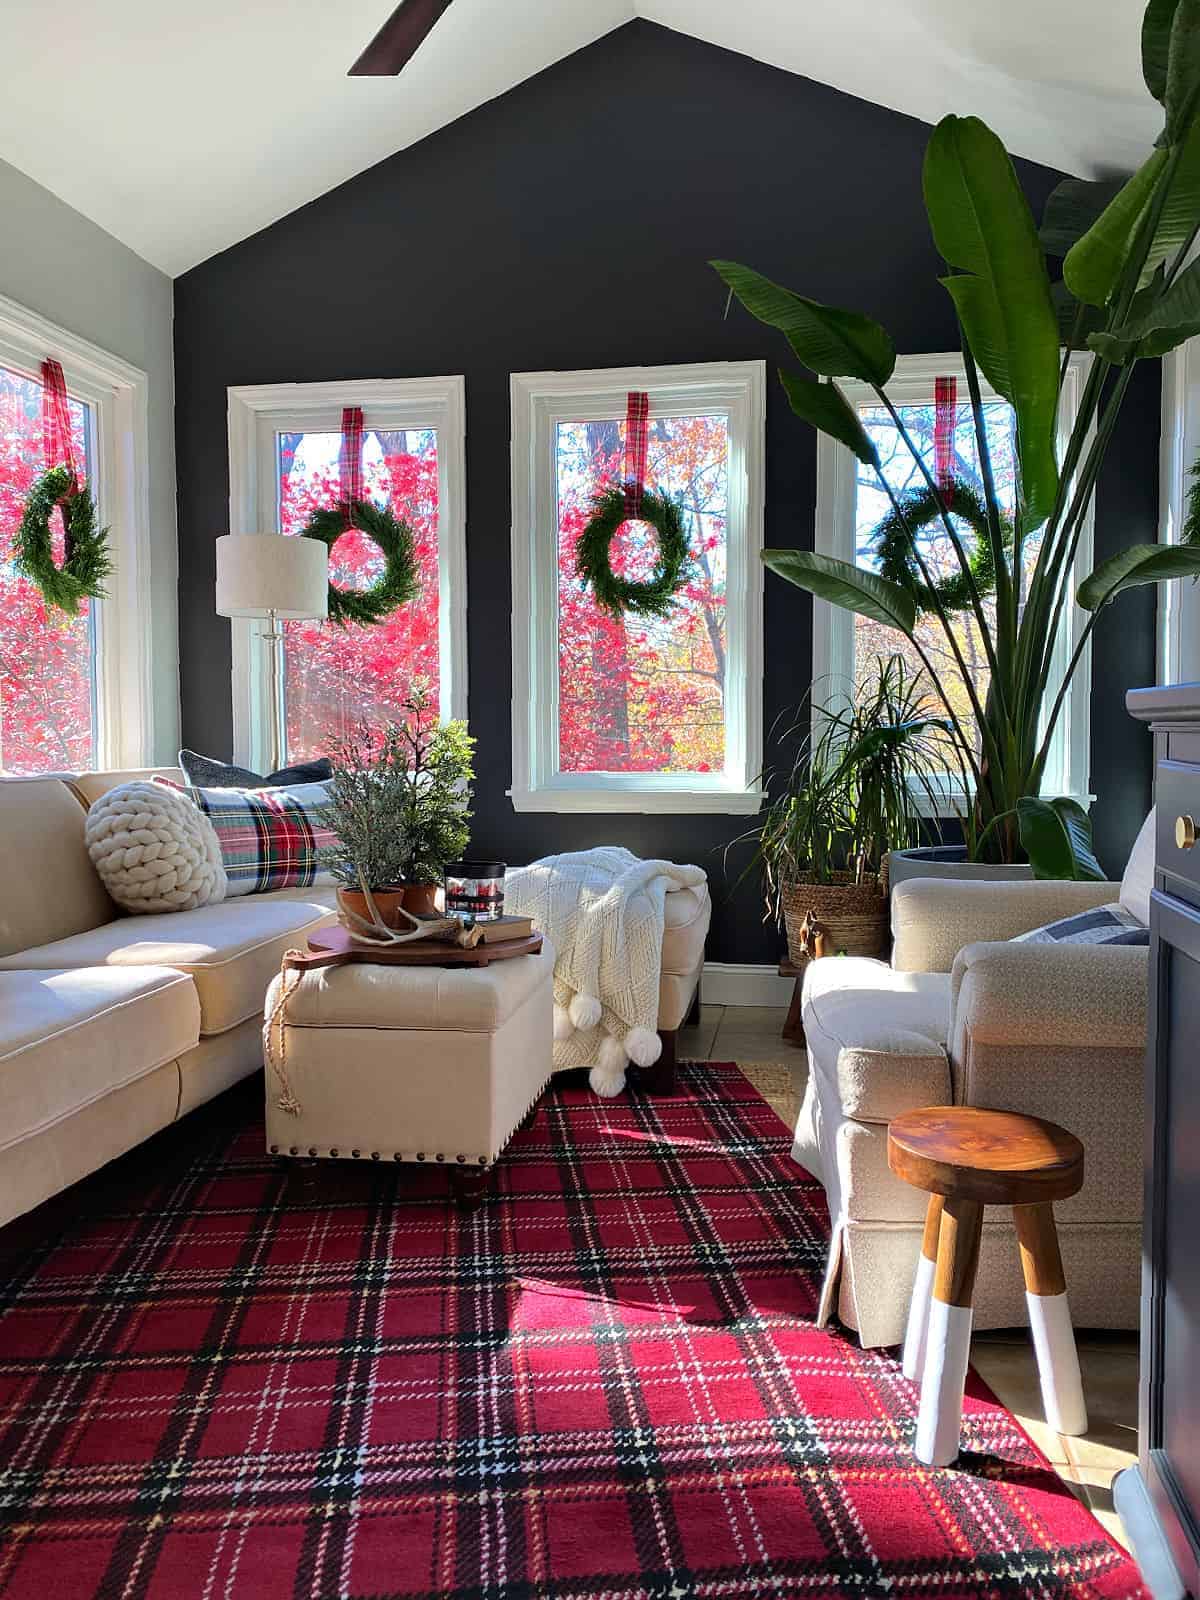 small sunroom decorated for Christmas with a red plaid rug and window wreaths